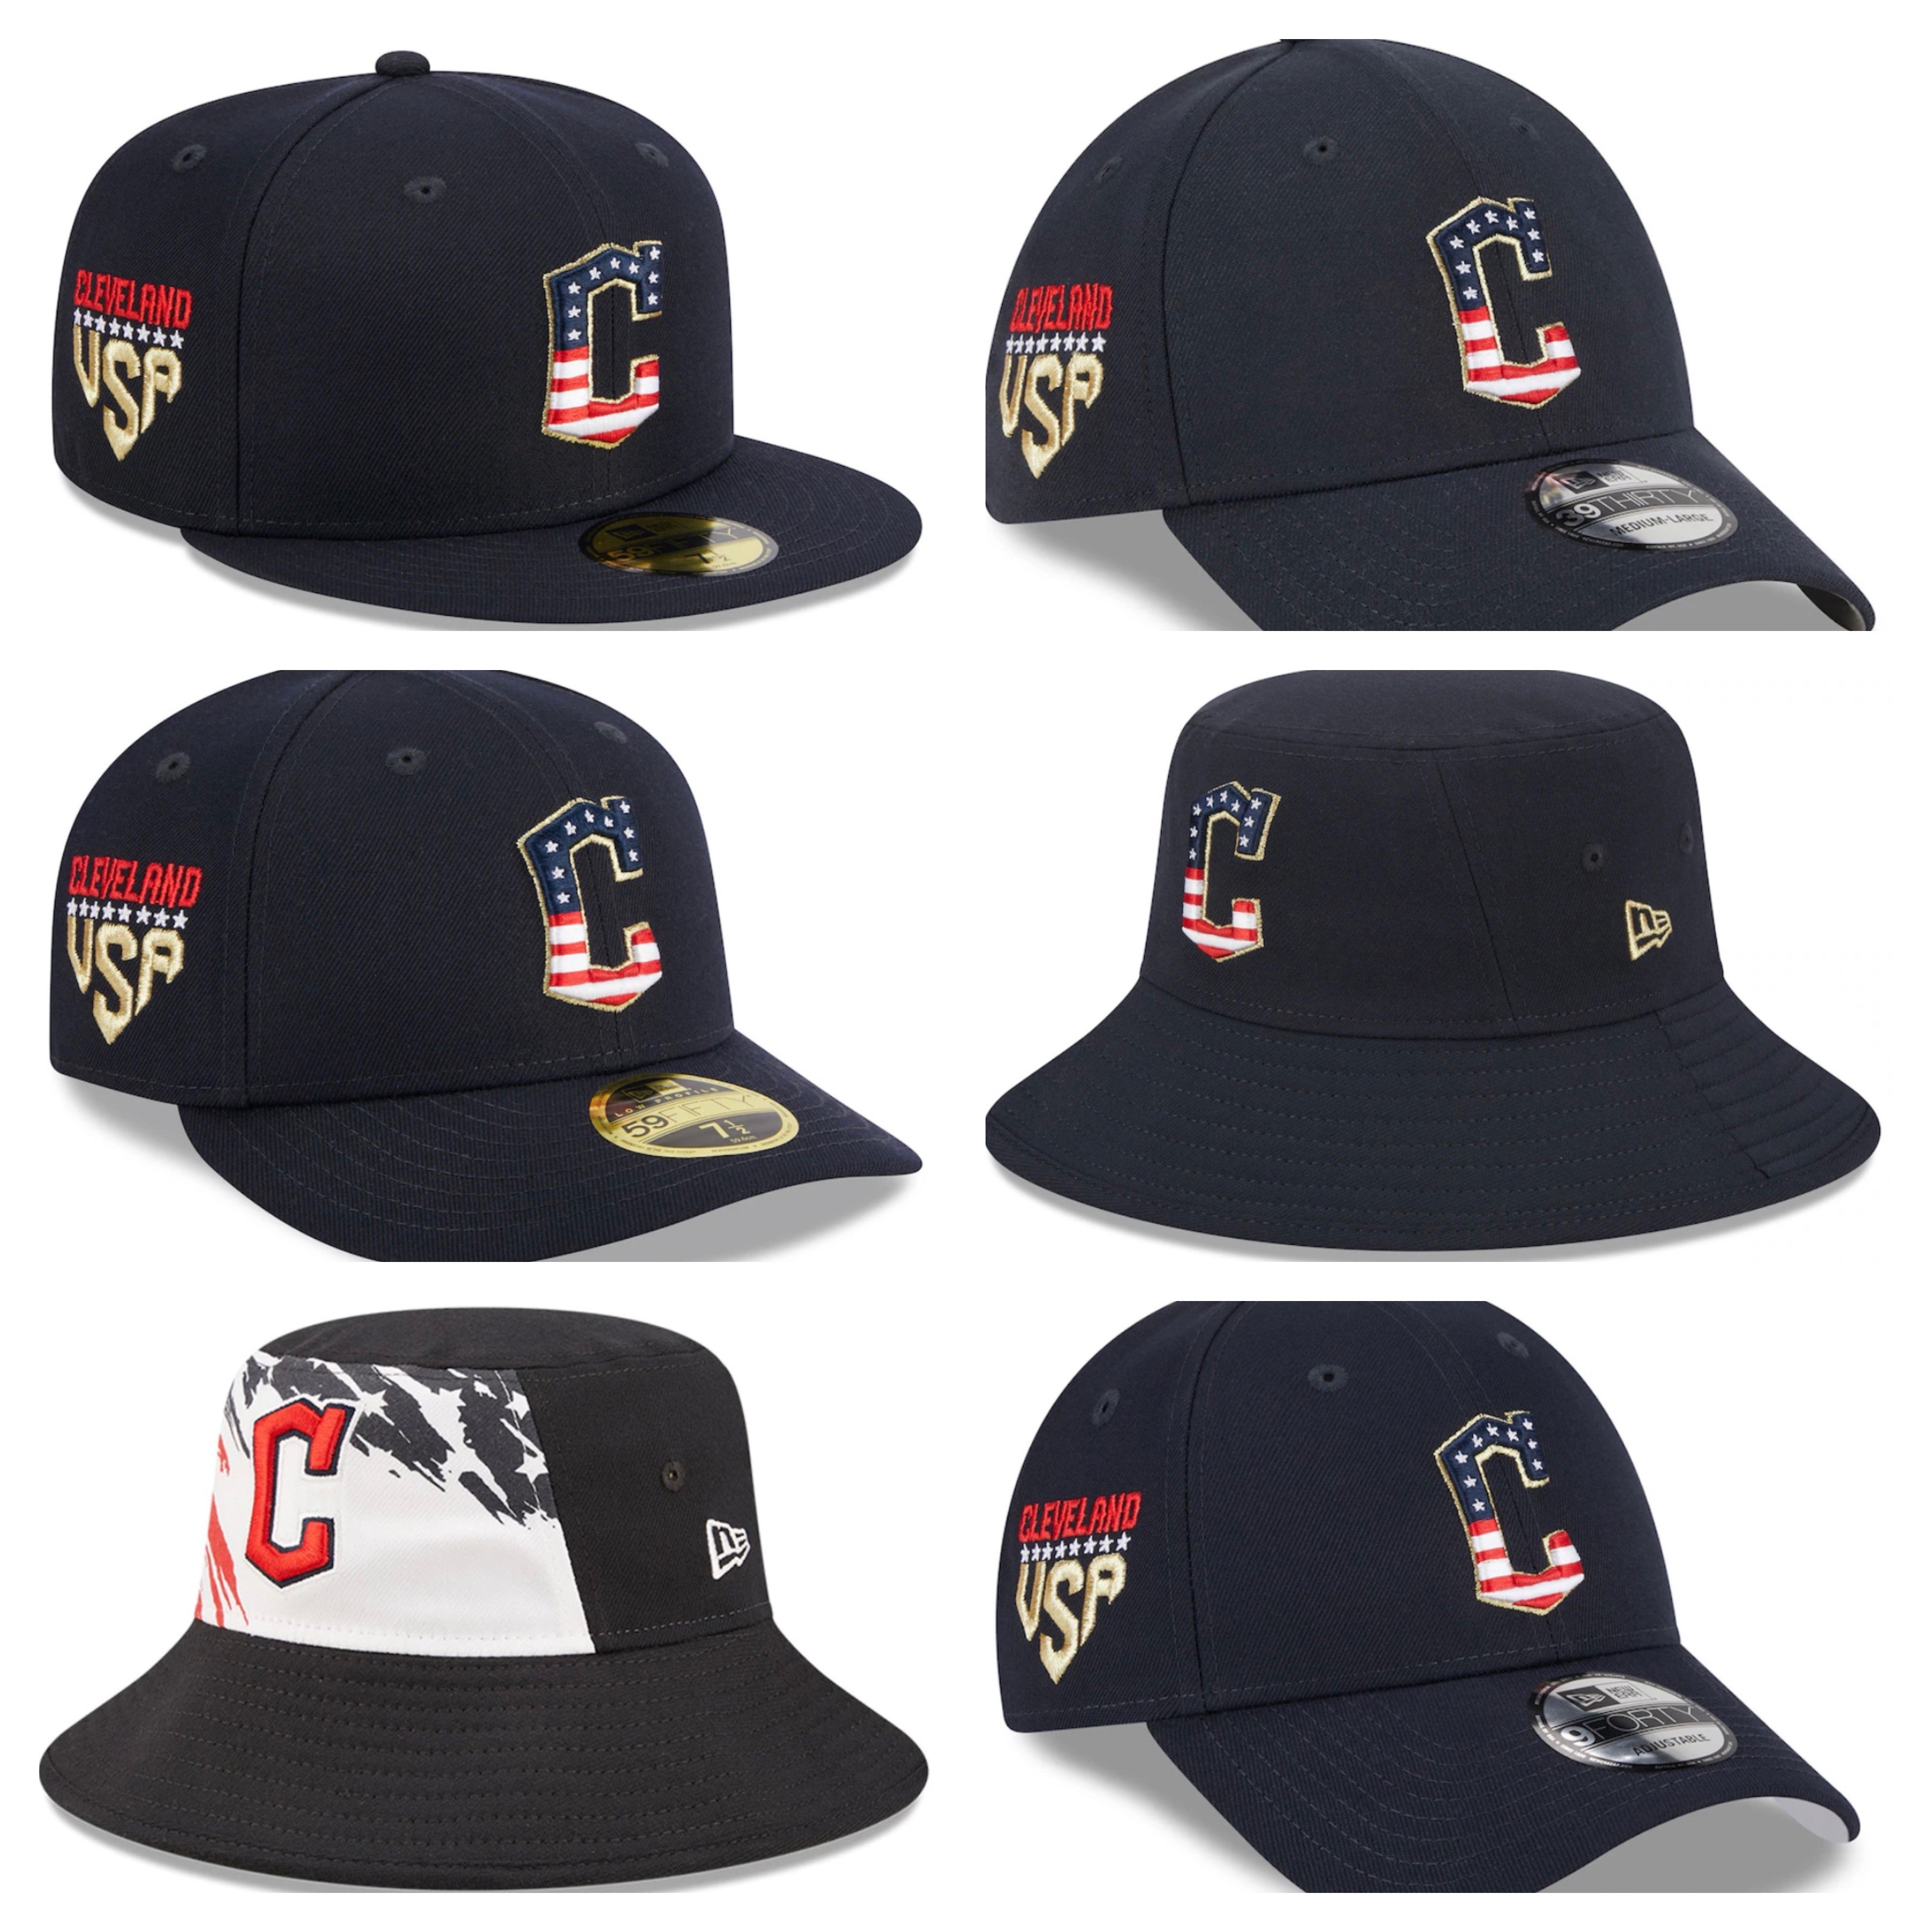 Stars and Stripes: Get your Detroit Tigers July 4th hats now